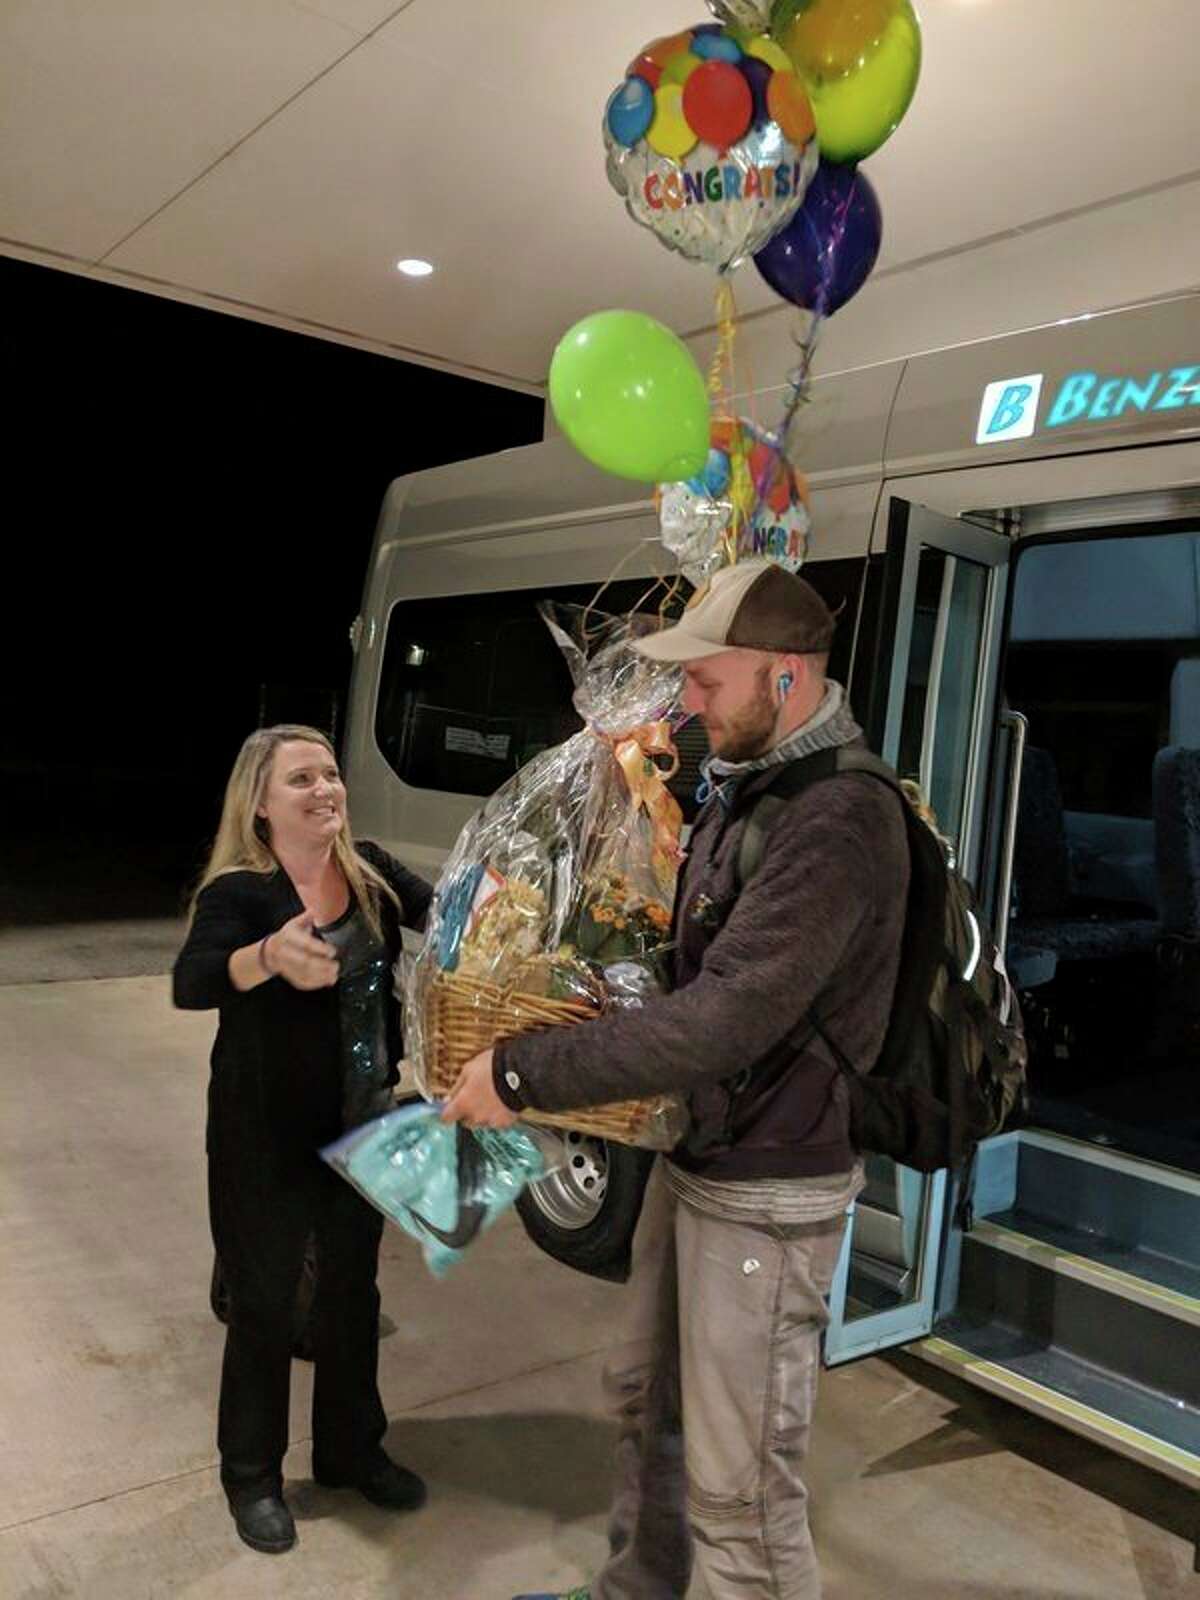 Nate Ely was the millionth rider on the Benzie Bus, which he takes on his daily commute from Traverse City to his job in Benzie County. (Courtesy Photo)